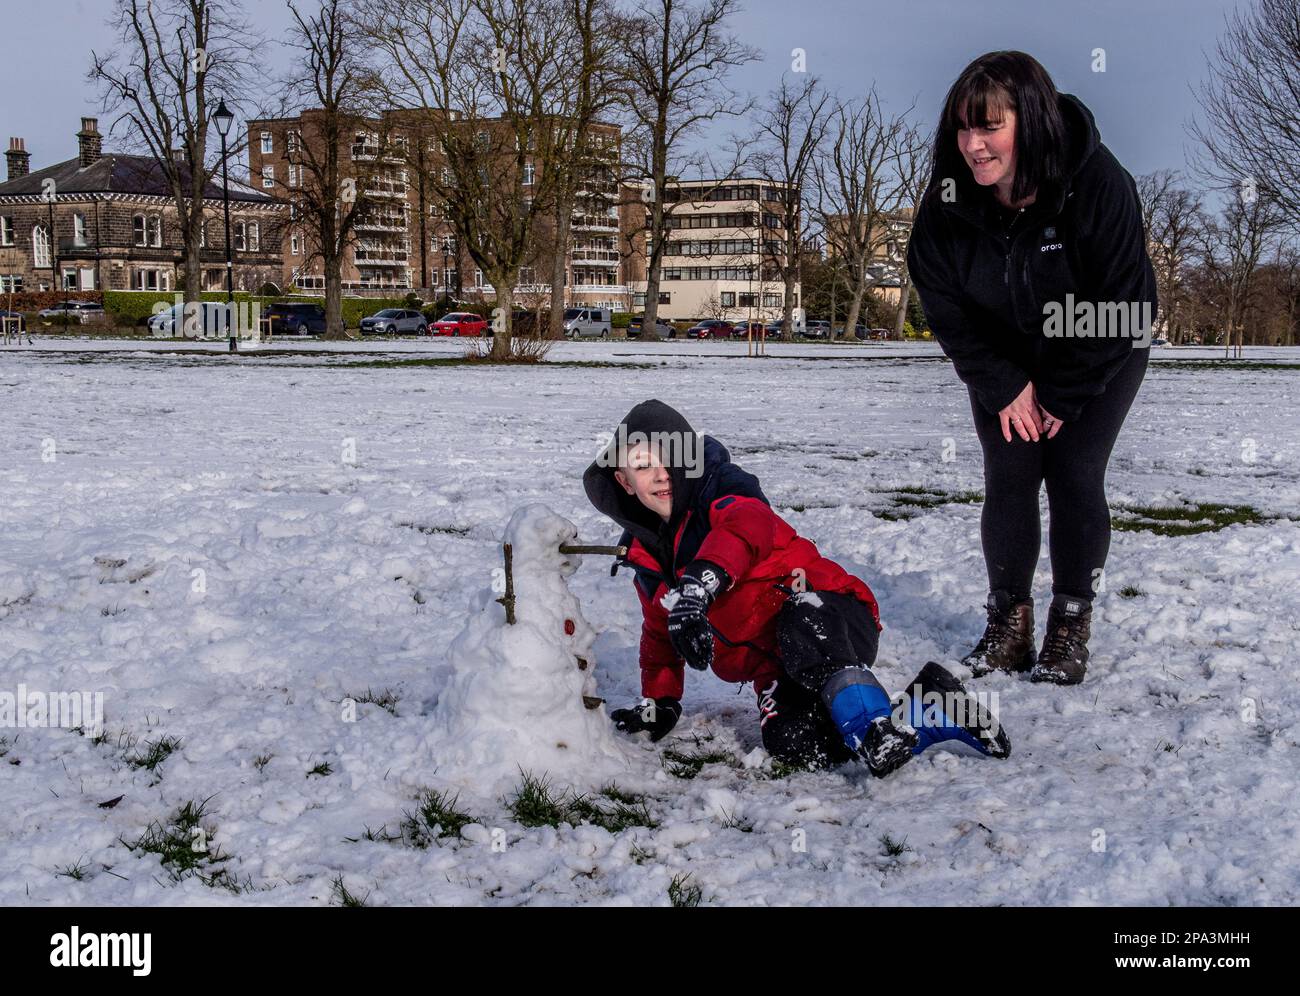 Harrogate, UK. 11th Mar, 2023. As the sun was shining and the snow started to melt, Archie Flintoft, who is 7, was making the most of it with mum Vicky, dad Dean and dog Amber, having missed out on the heavier snow yesterday as he was in hospital having his 97th blood transfusion. Archie suffers from Diamond Blackfan Anemia and needs a transfusion every 3 weeks. Picture Credit: ernesto rogata/Alamy Live News Stock Photo